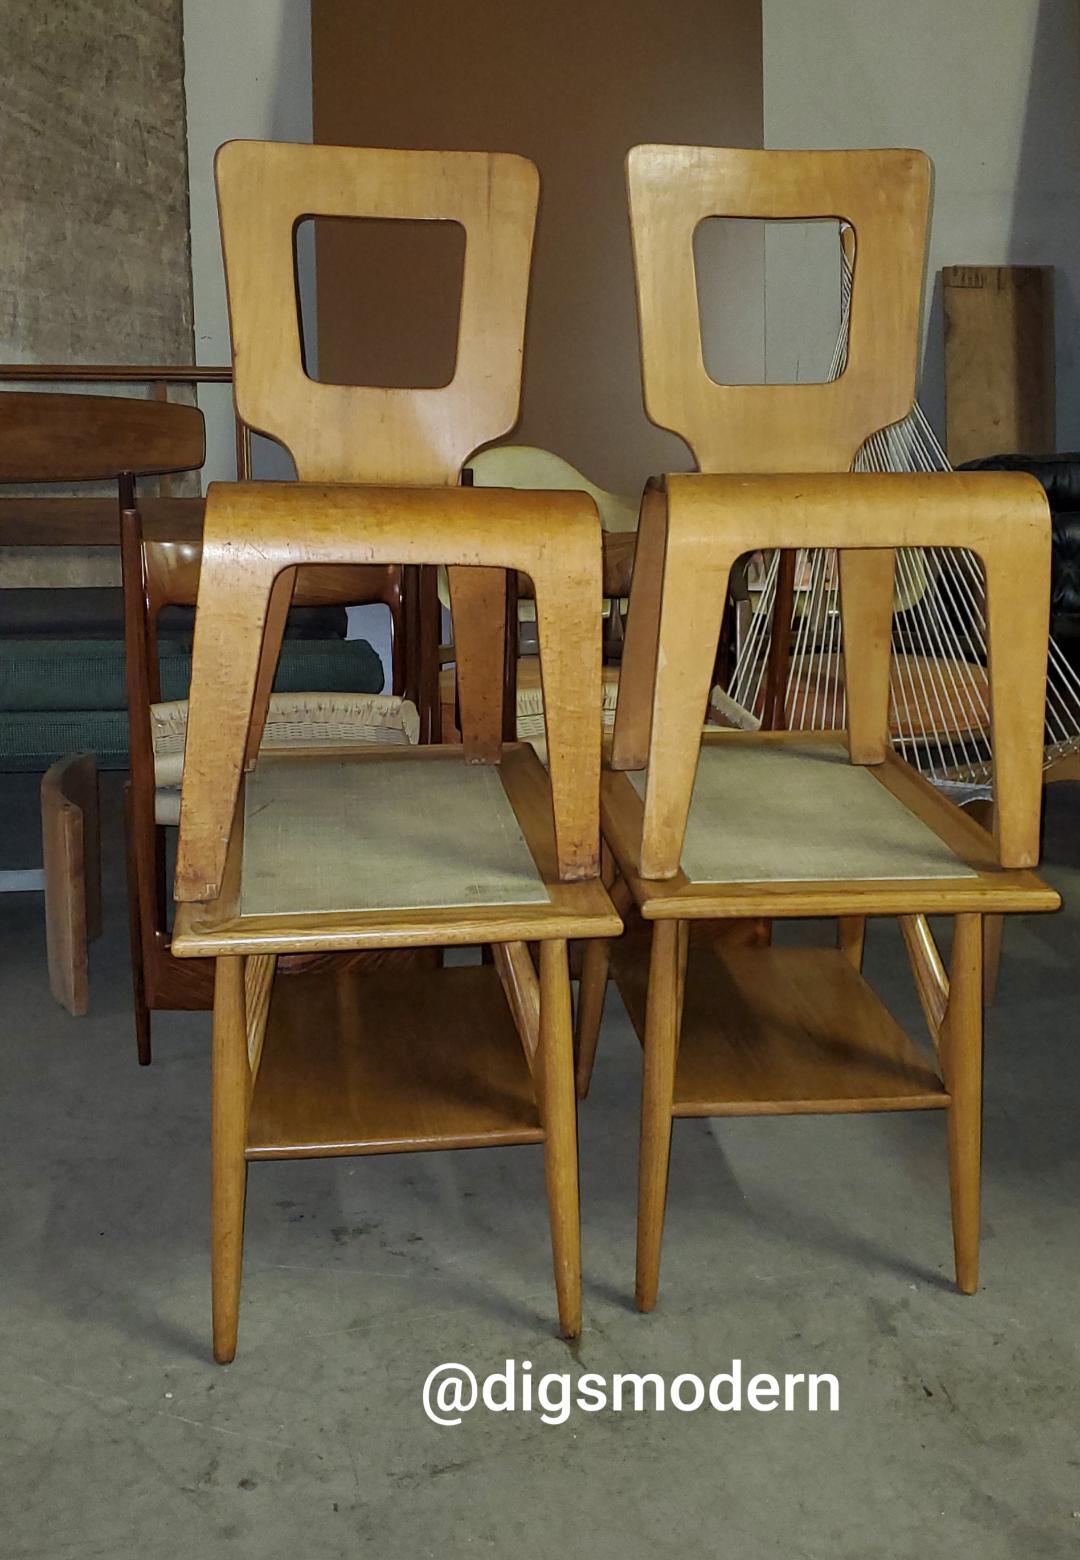 Herbert Von Thaden And Donald Lewis Jordan Molded Birch Plywood Chairs Model 102 In Good Condition For Sale In Monrovia, CA